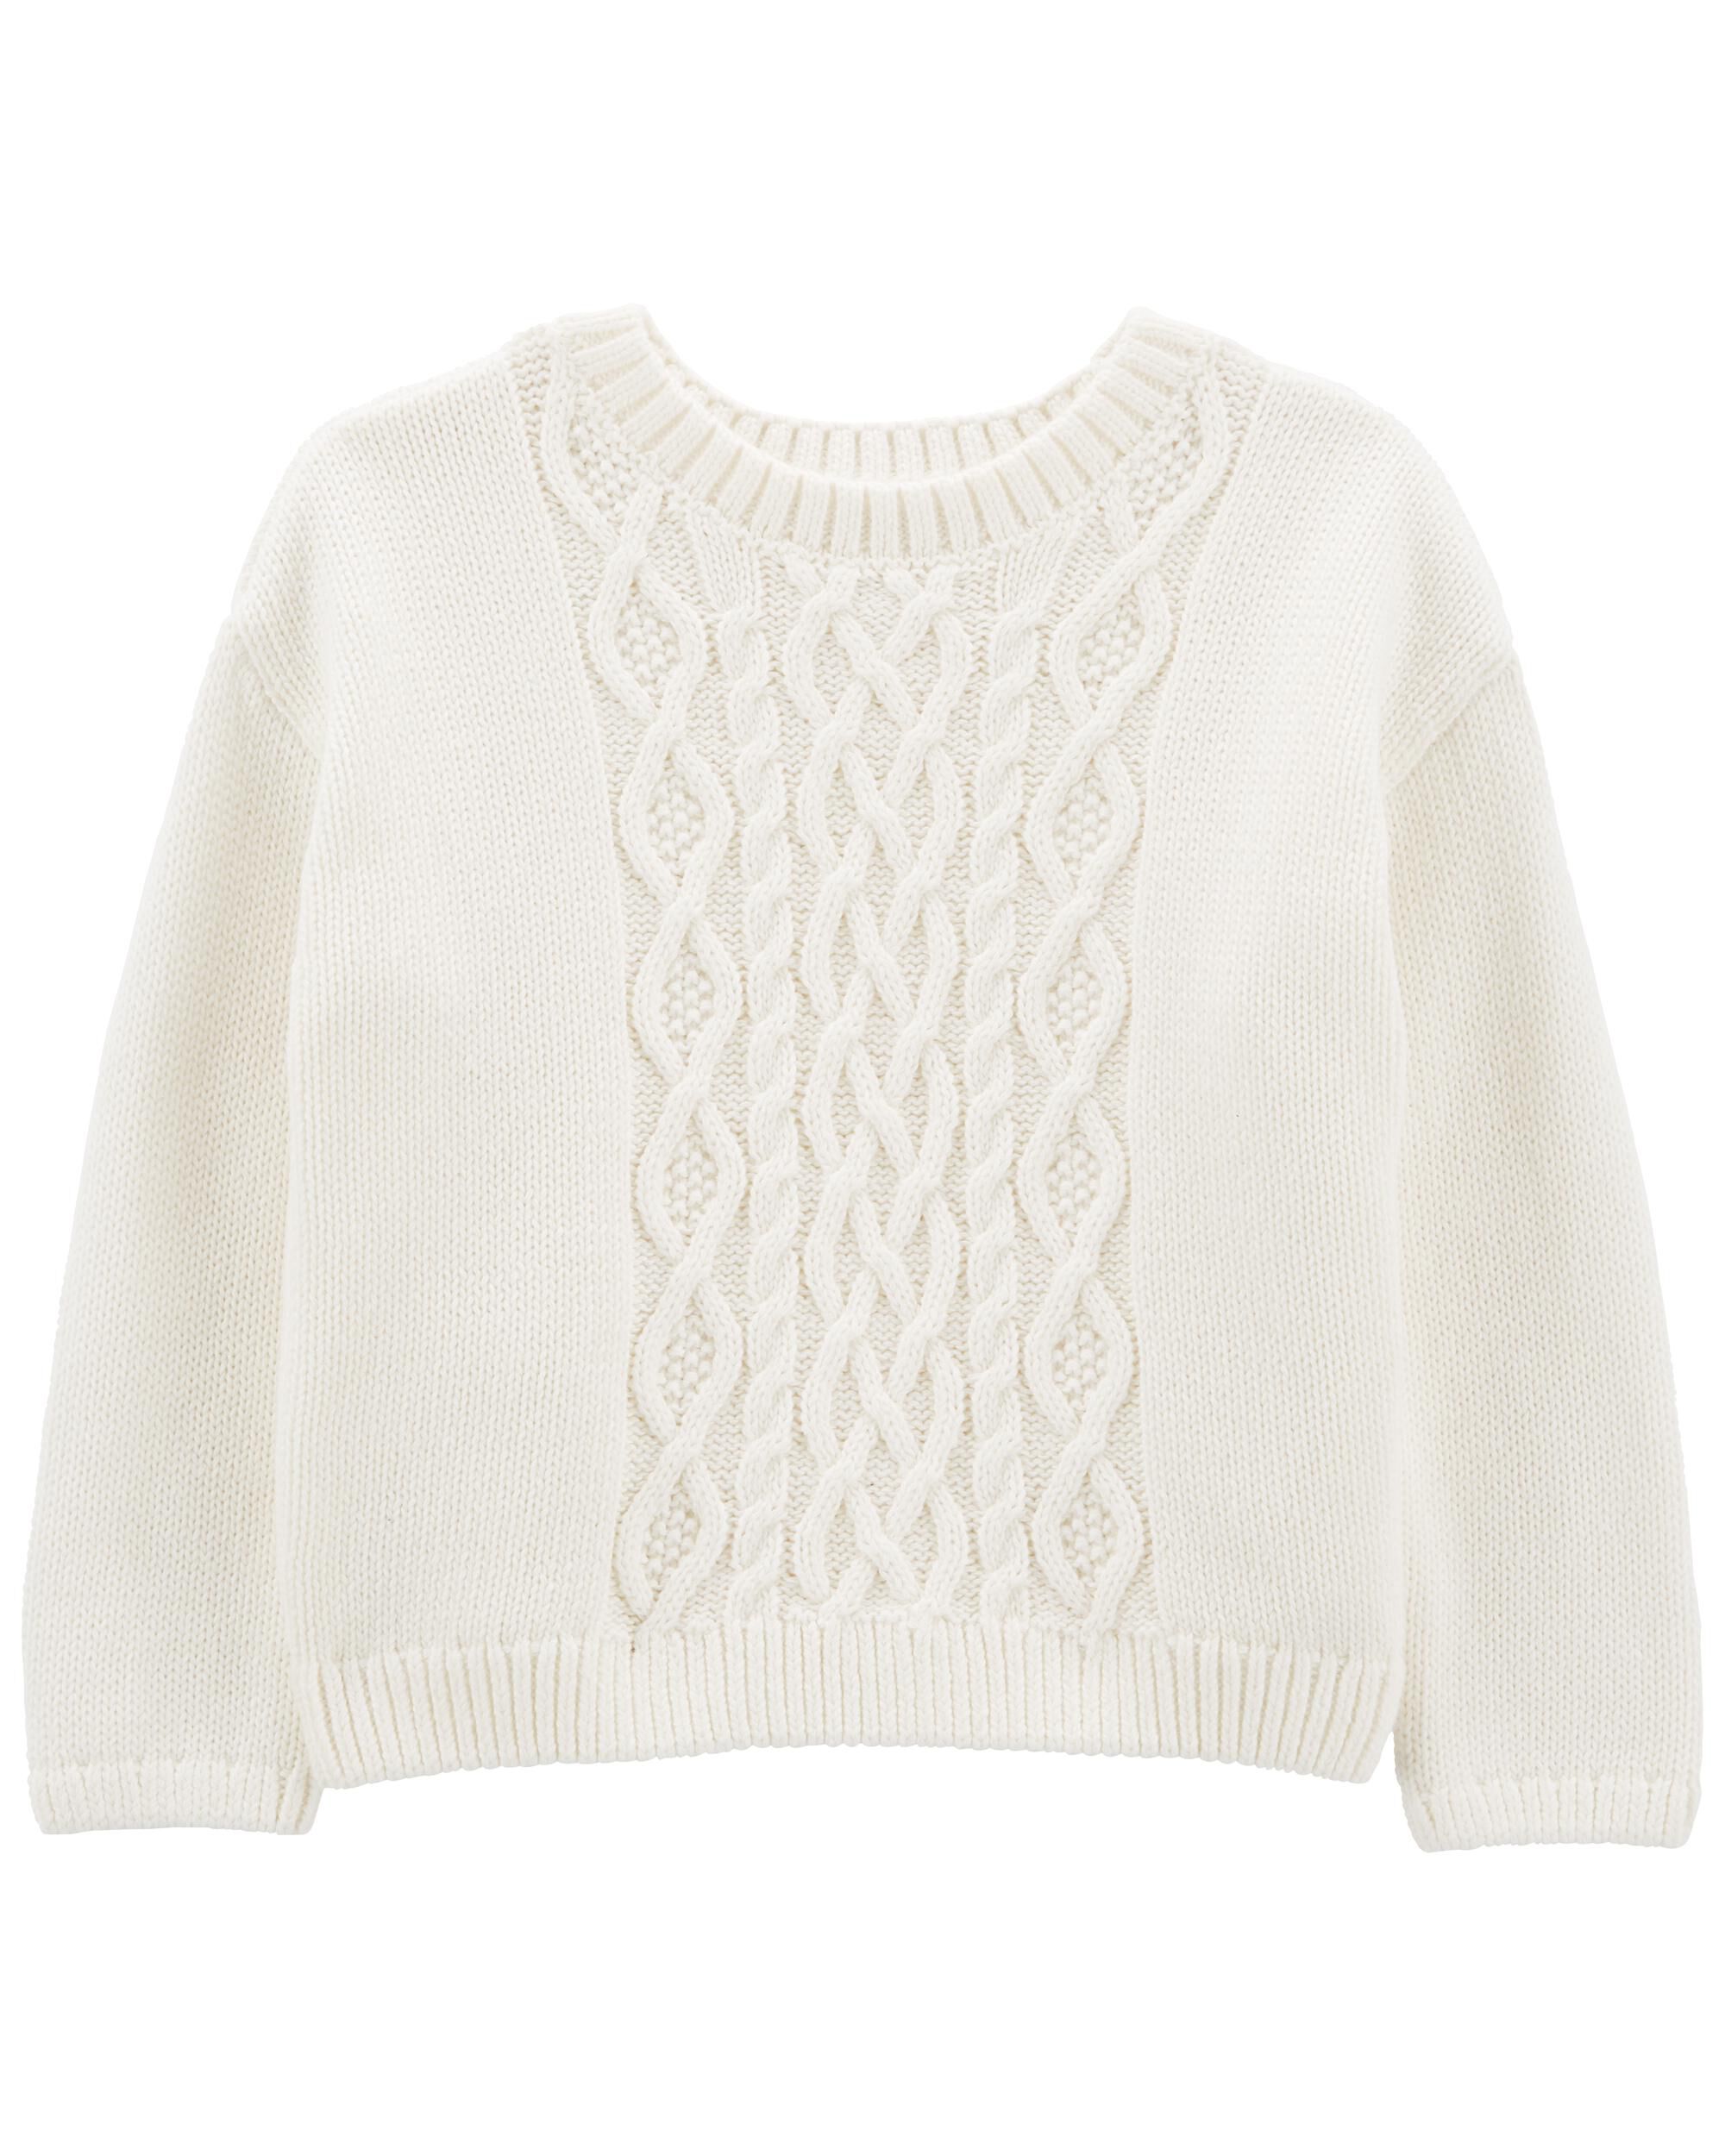 Carters Cable Knit Sweater